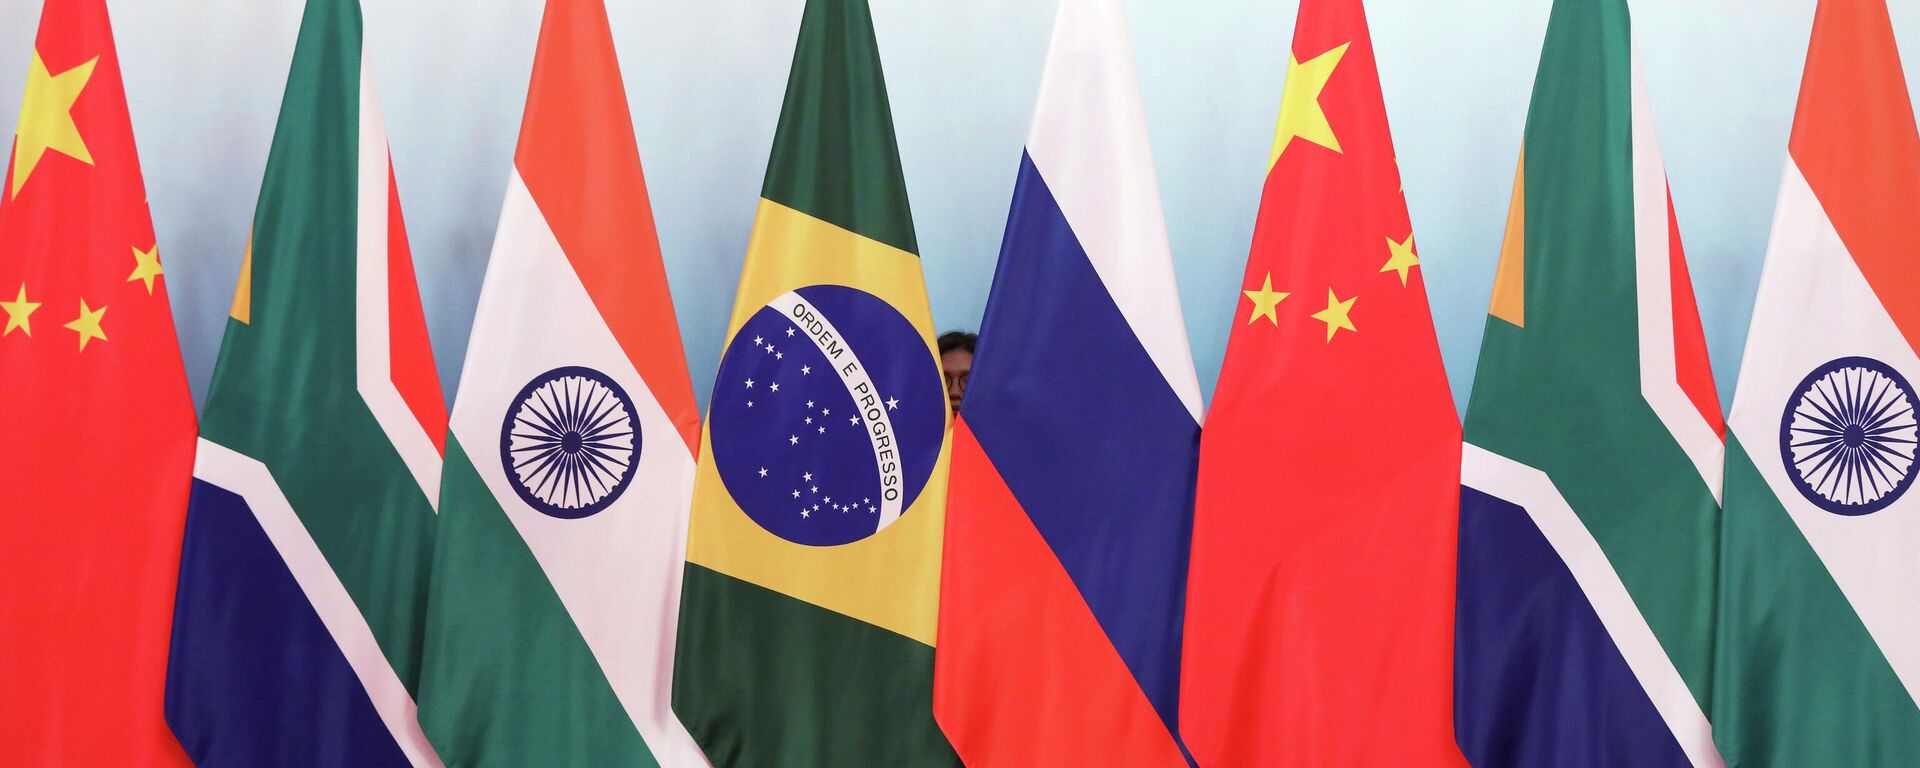 Staff worker stands behind national flags of Brazil, Russia, China, South Africa and India to tidy the flags ahead of a group photo during the BRICS Summit at the Xiamen International Conference and Exhibition Center in Xiamen, southeastern China's Fujian Province, Monday, Sept. 4, 2017. - Sputnik Africa, 1920, 23.07.2023